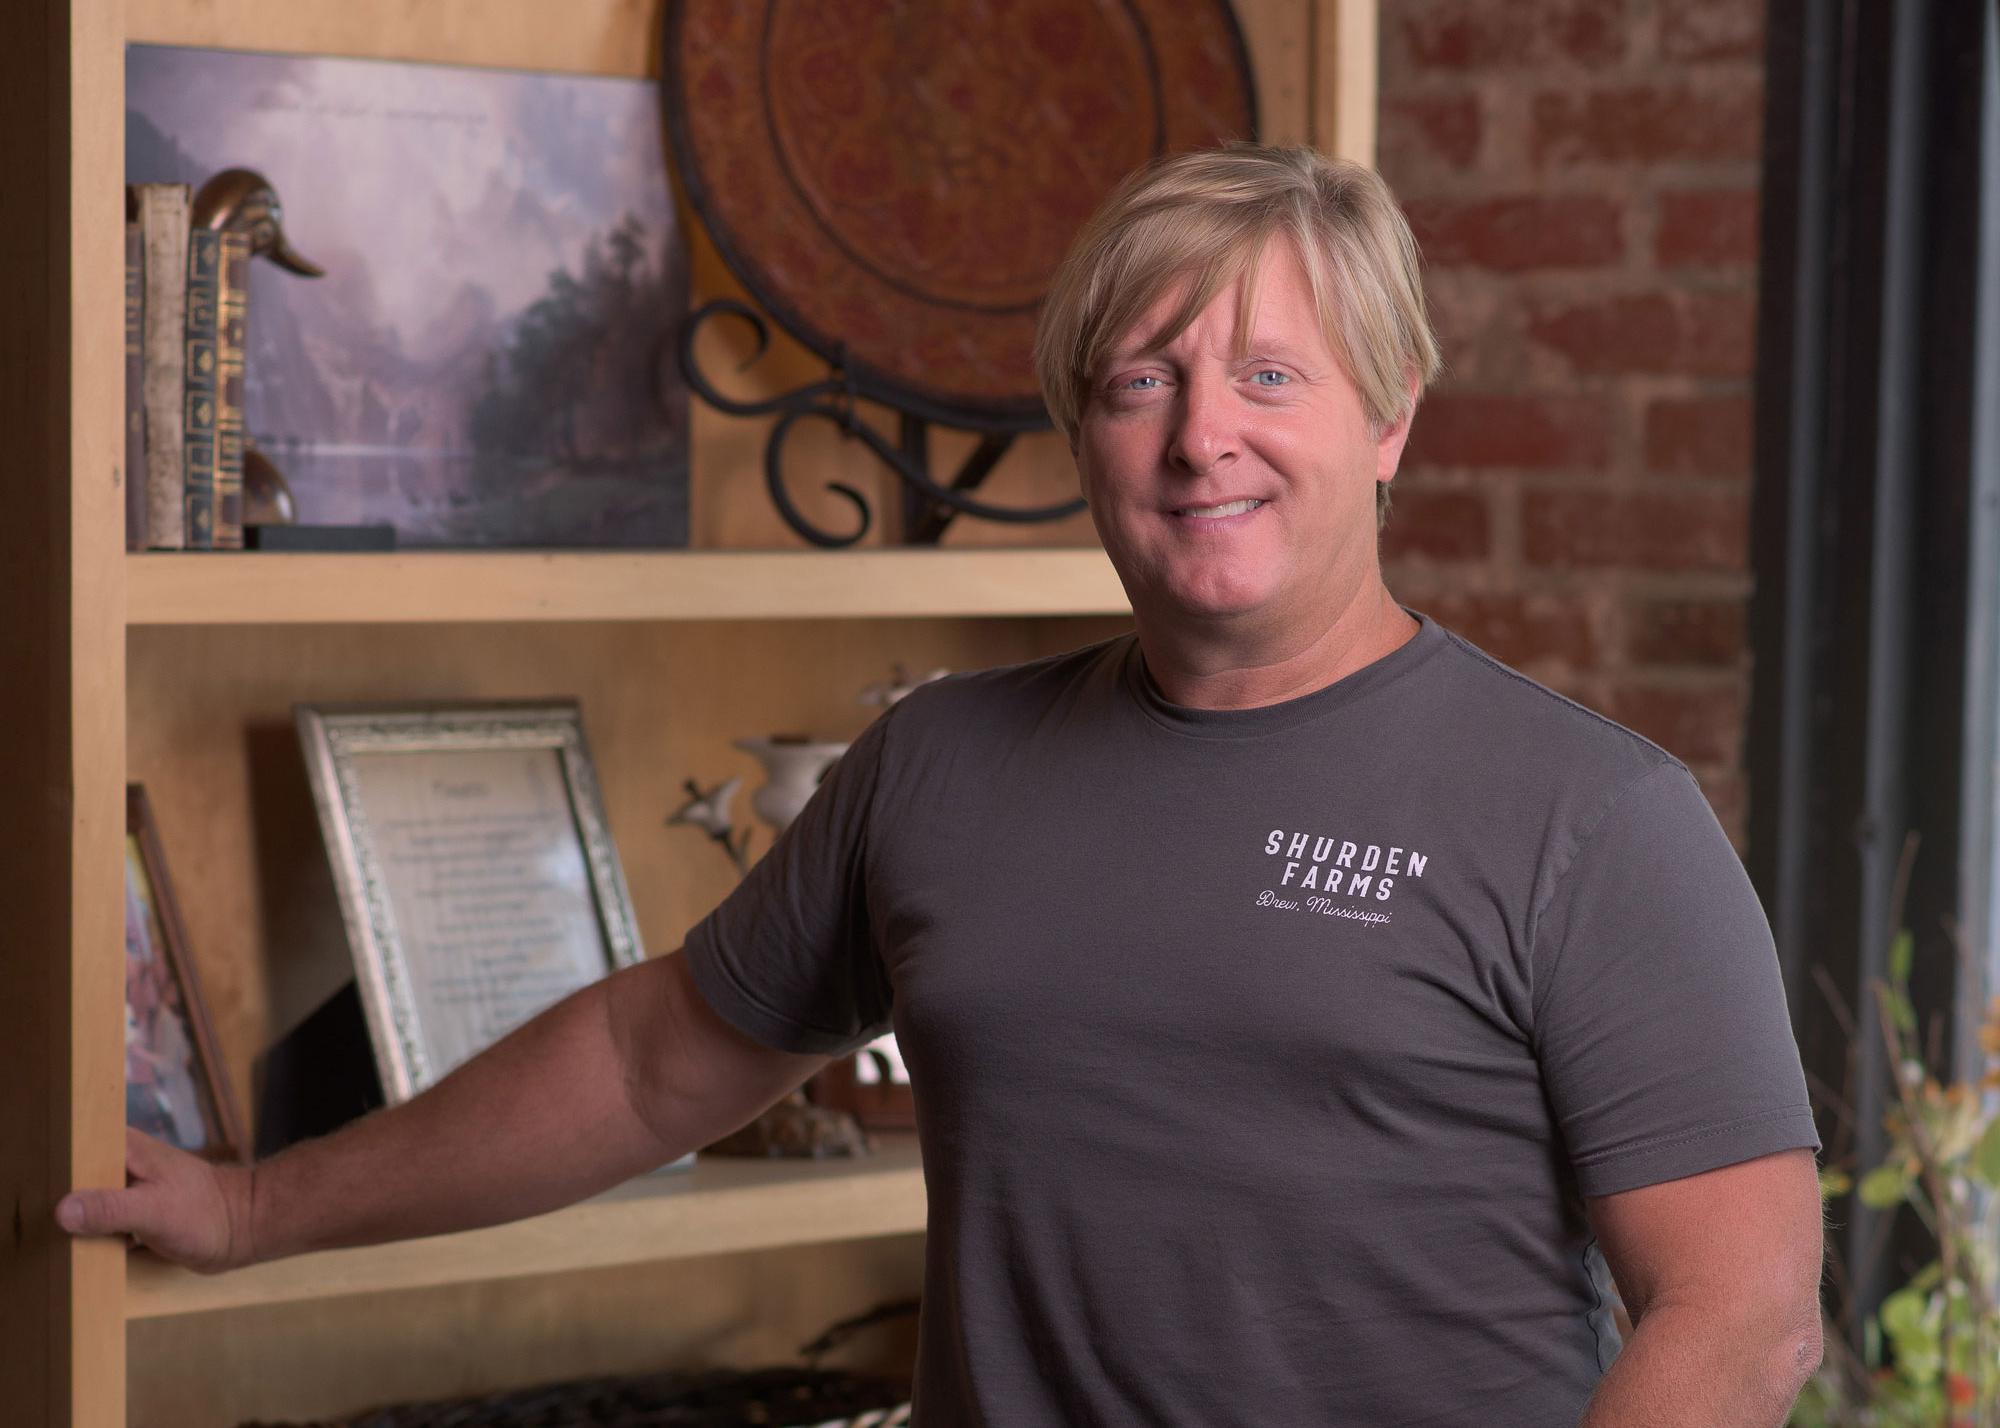 A blonde man wearing a T-shirt with Shuden Farms listed on it standing in front of a bookshelf, smiling.